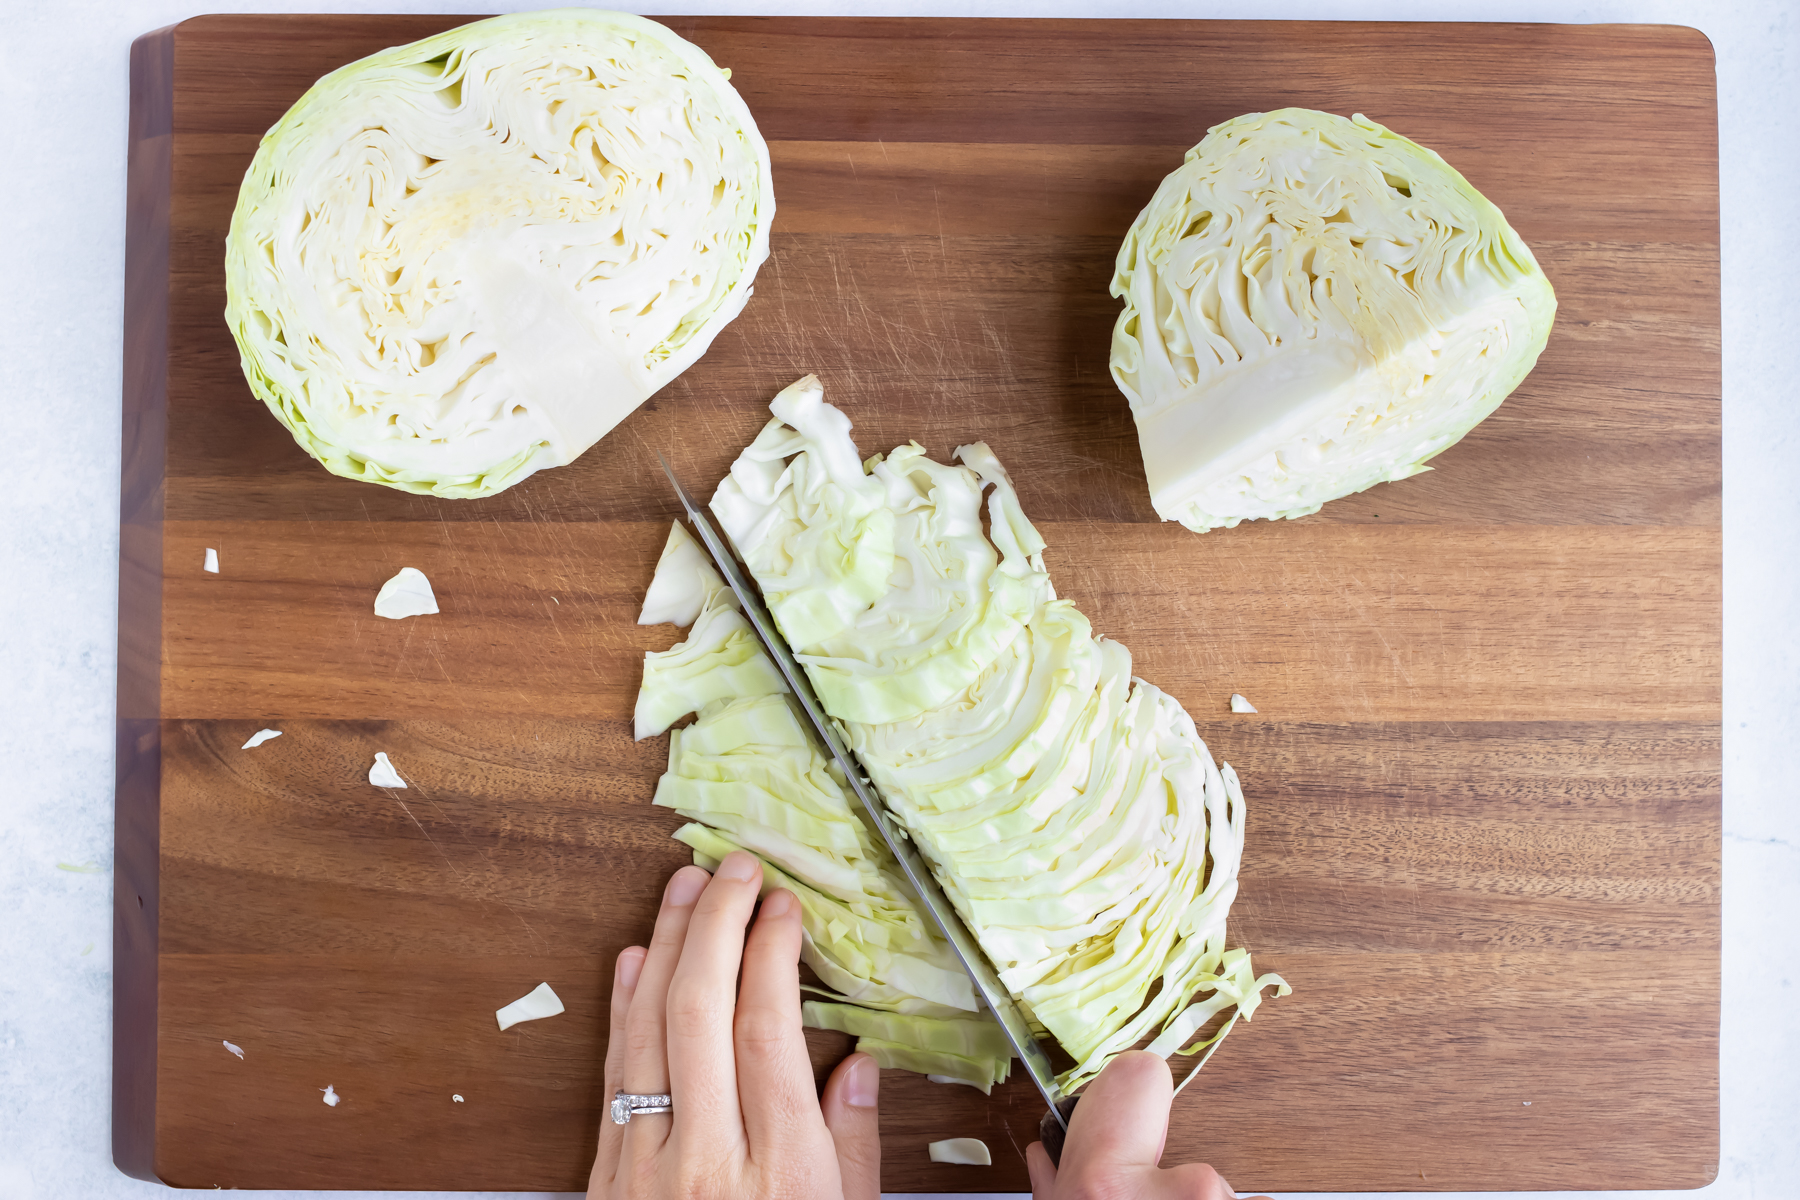 A knife cutting cabbage into thin 1-inch pieces.